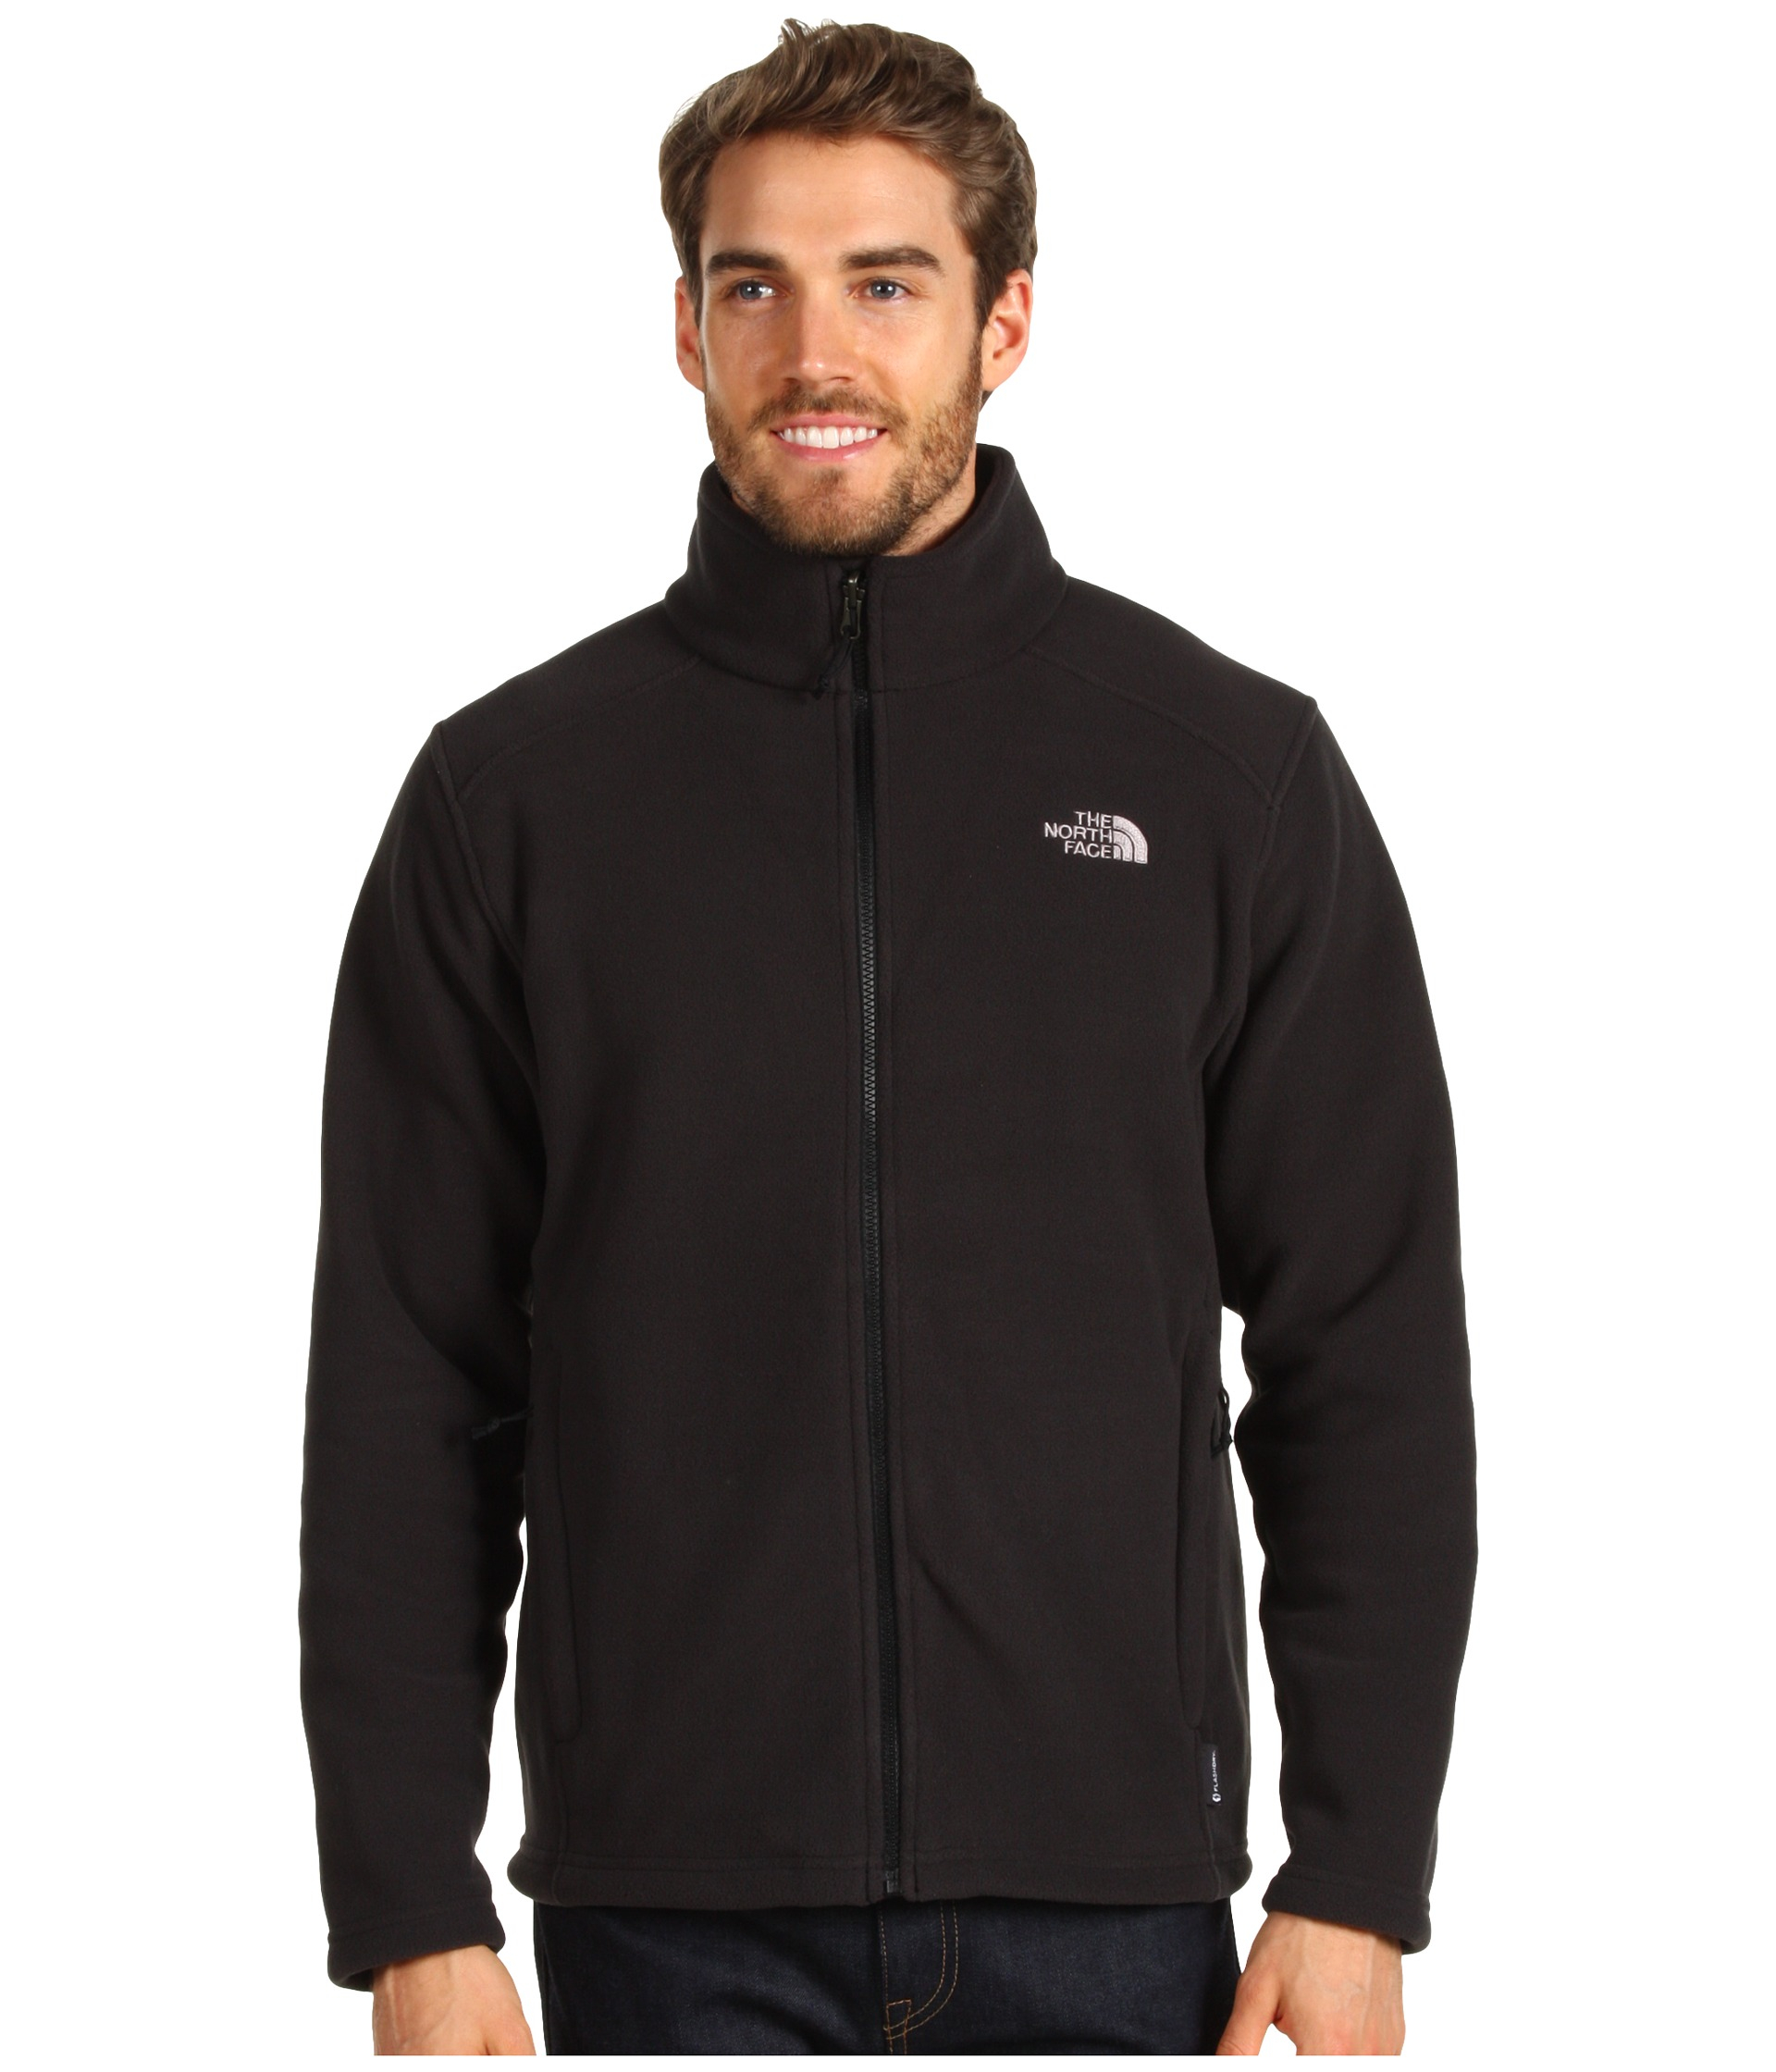 The North Face Rdt 300 Jacket in Black 